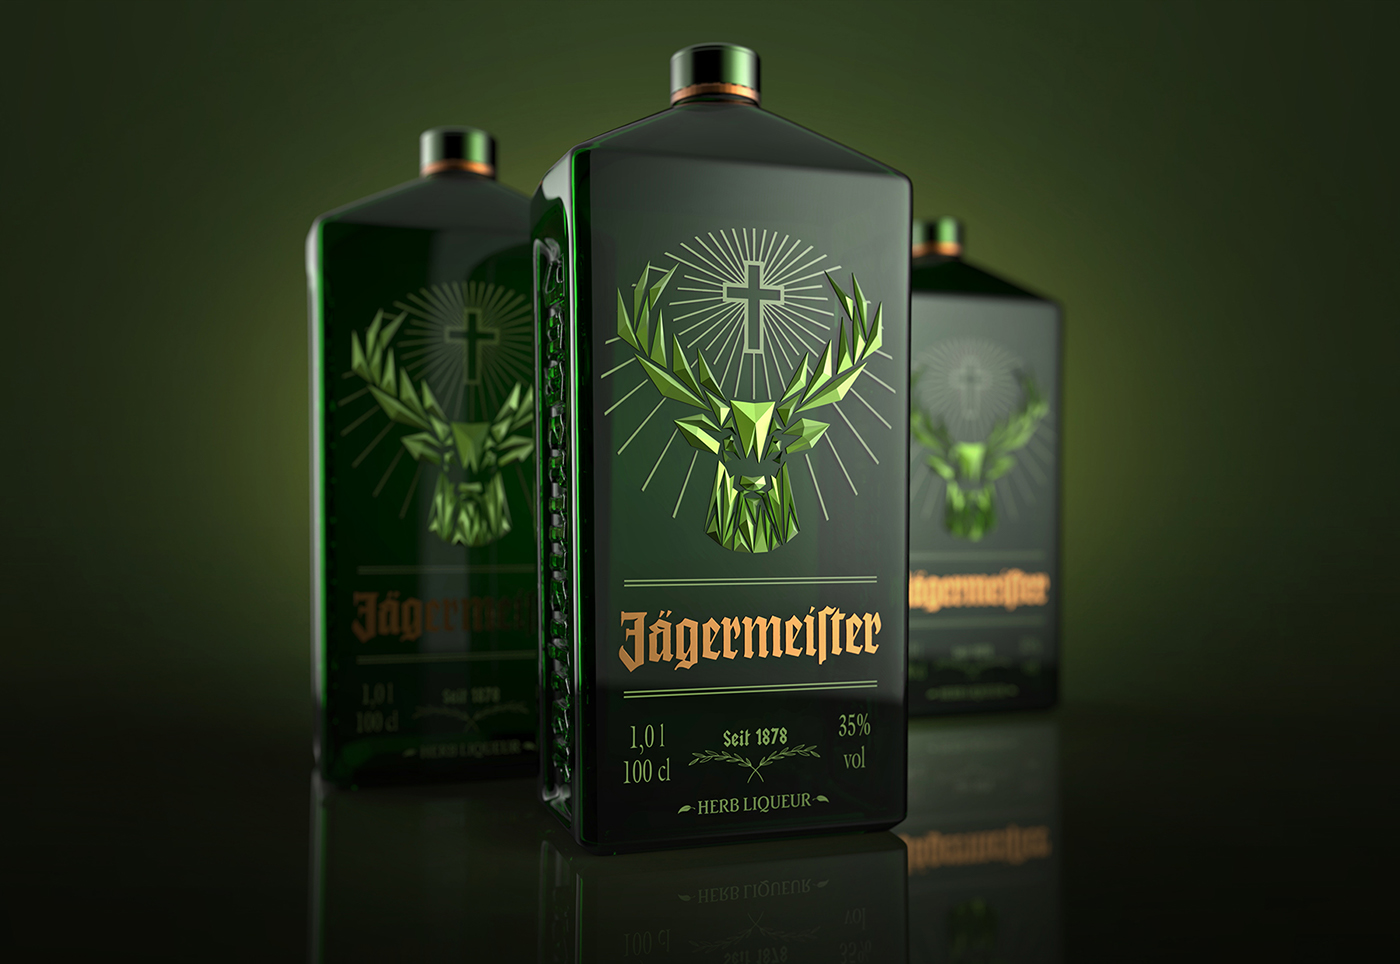 Jagermeister deer lowpoly bottle concept productdesign tomajestic famous drink